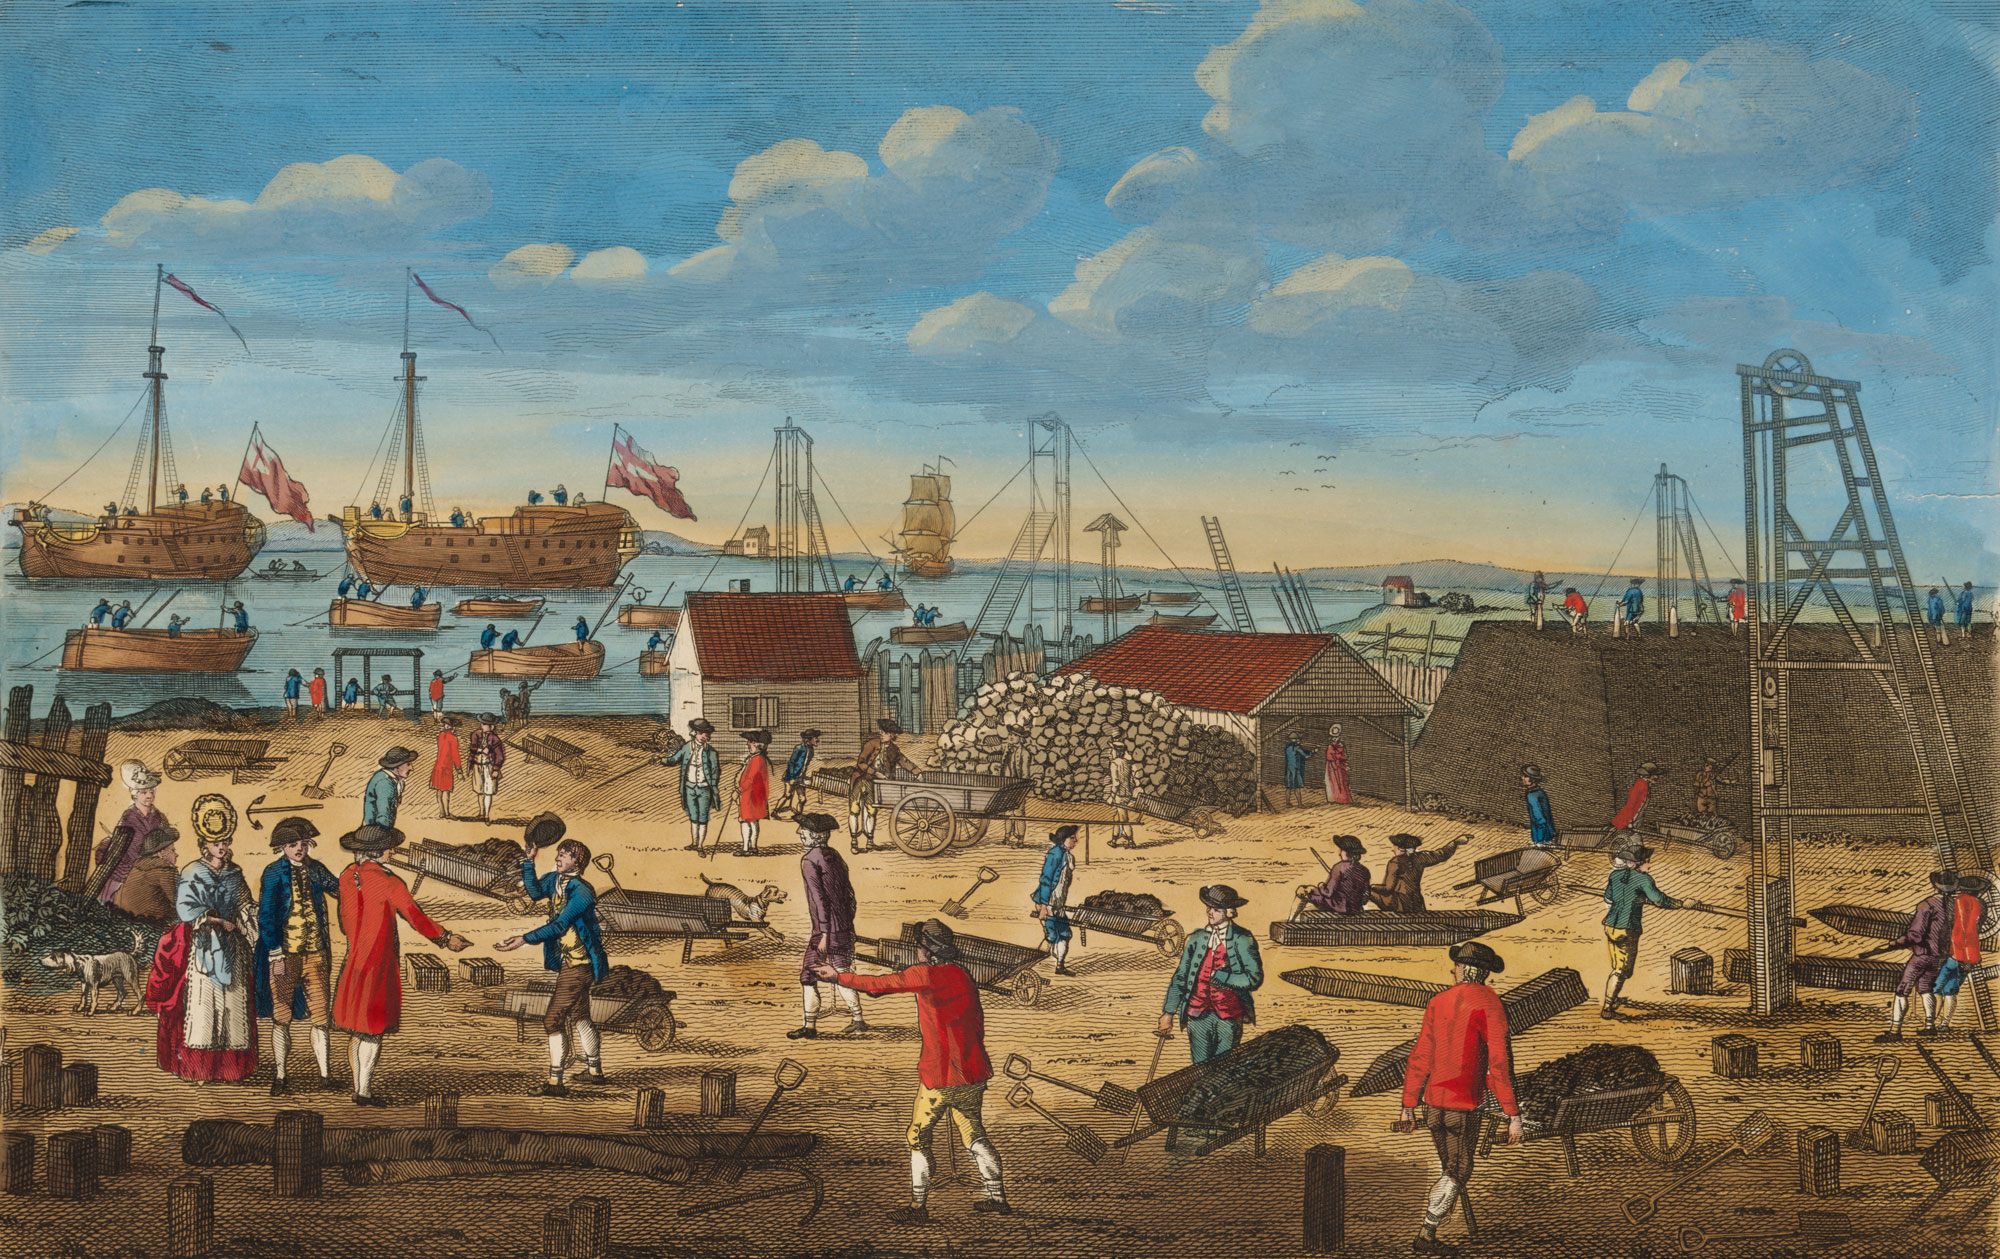 View near Woolwich in Kent shewing [sic] the employment of the convicts from the hulks’, about 1800.